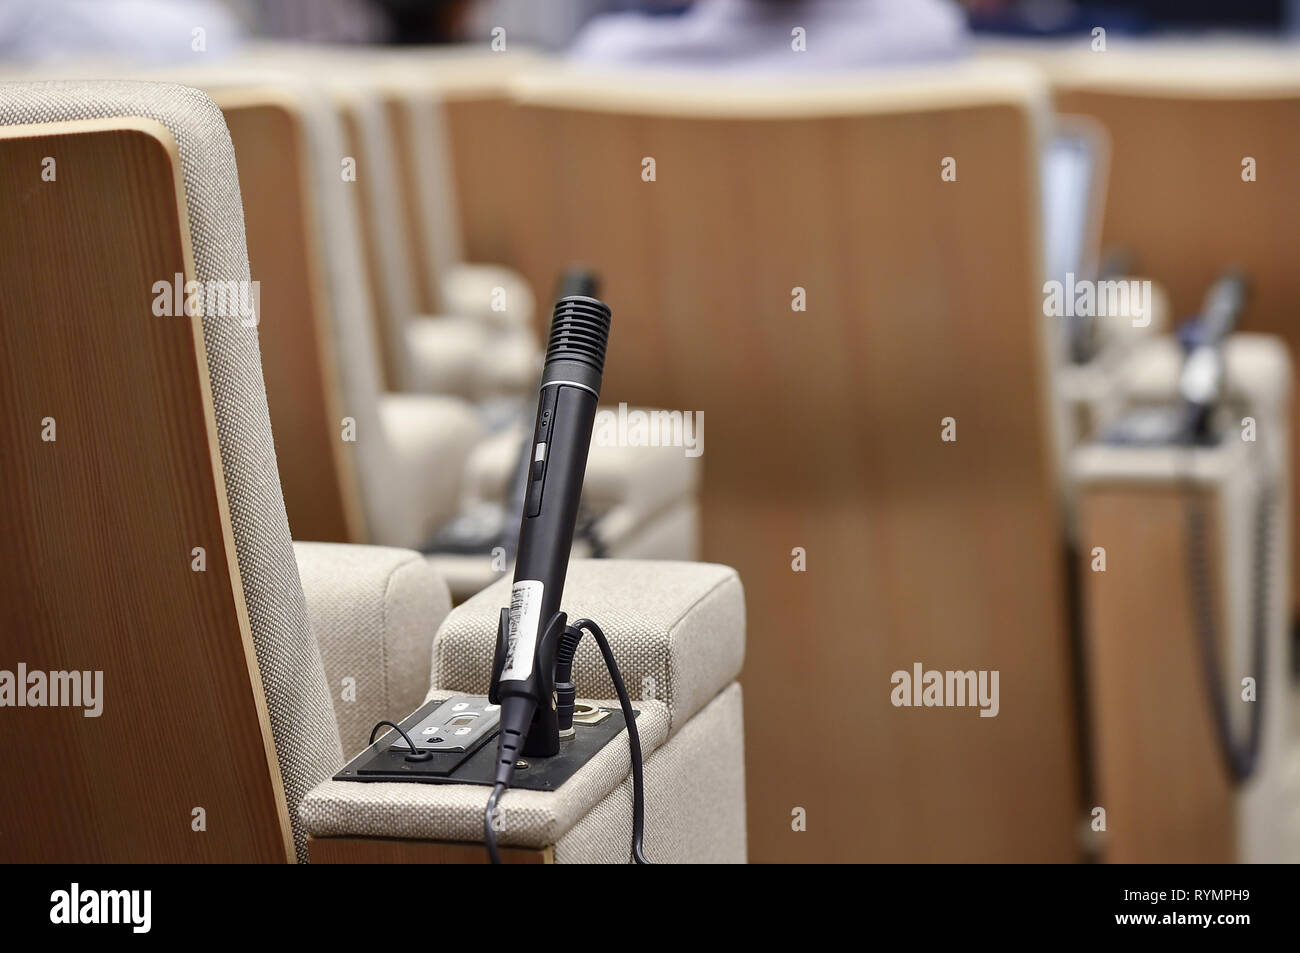 Detail shot with a press microphone in a conference room Stock Photo